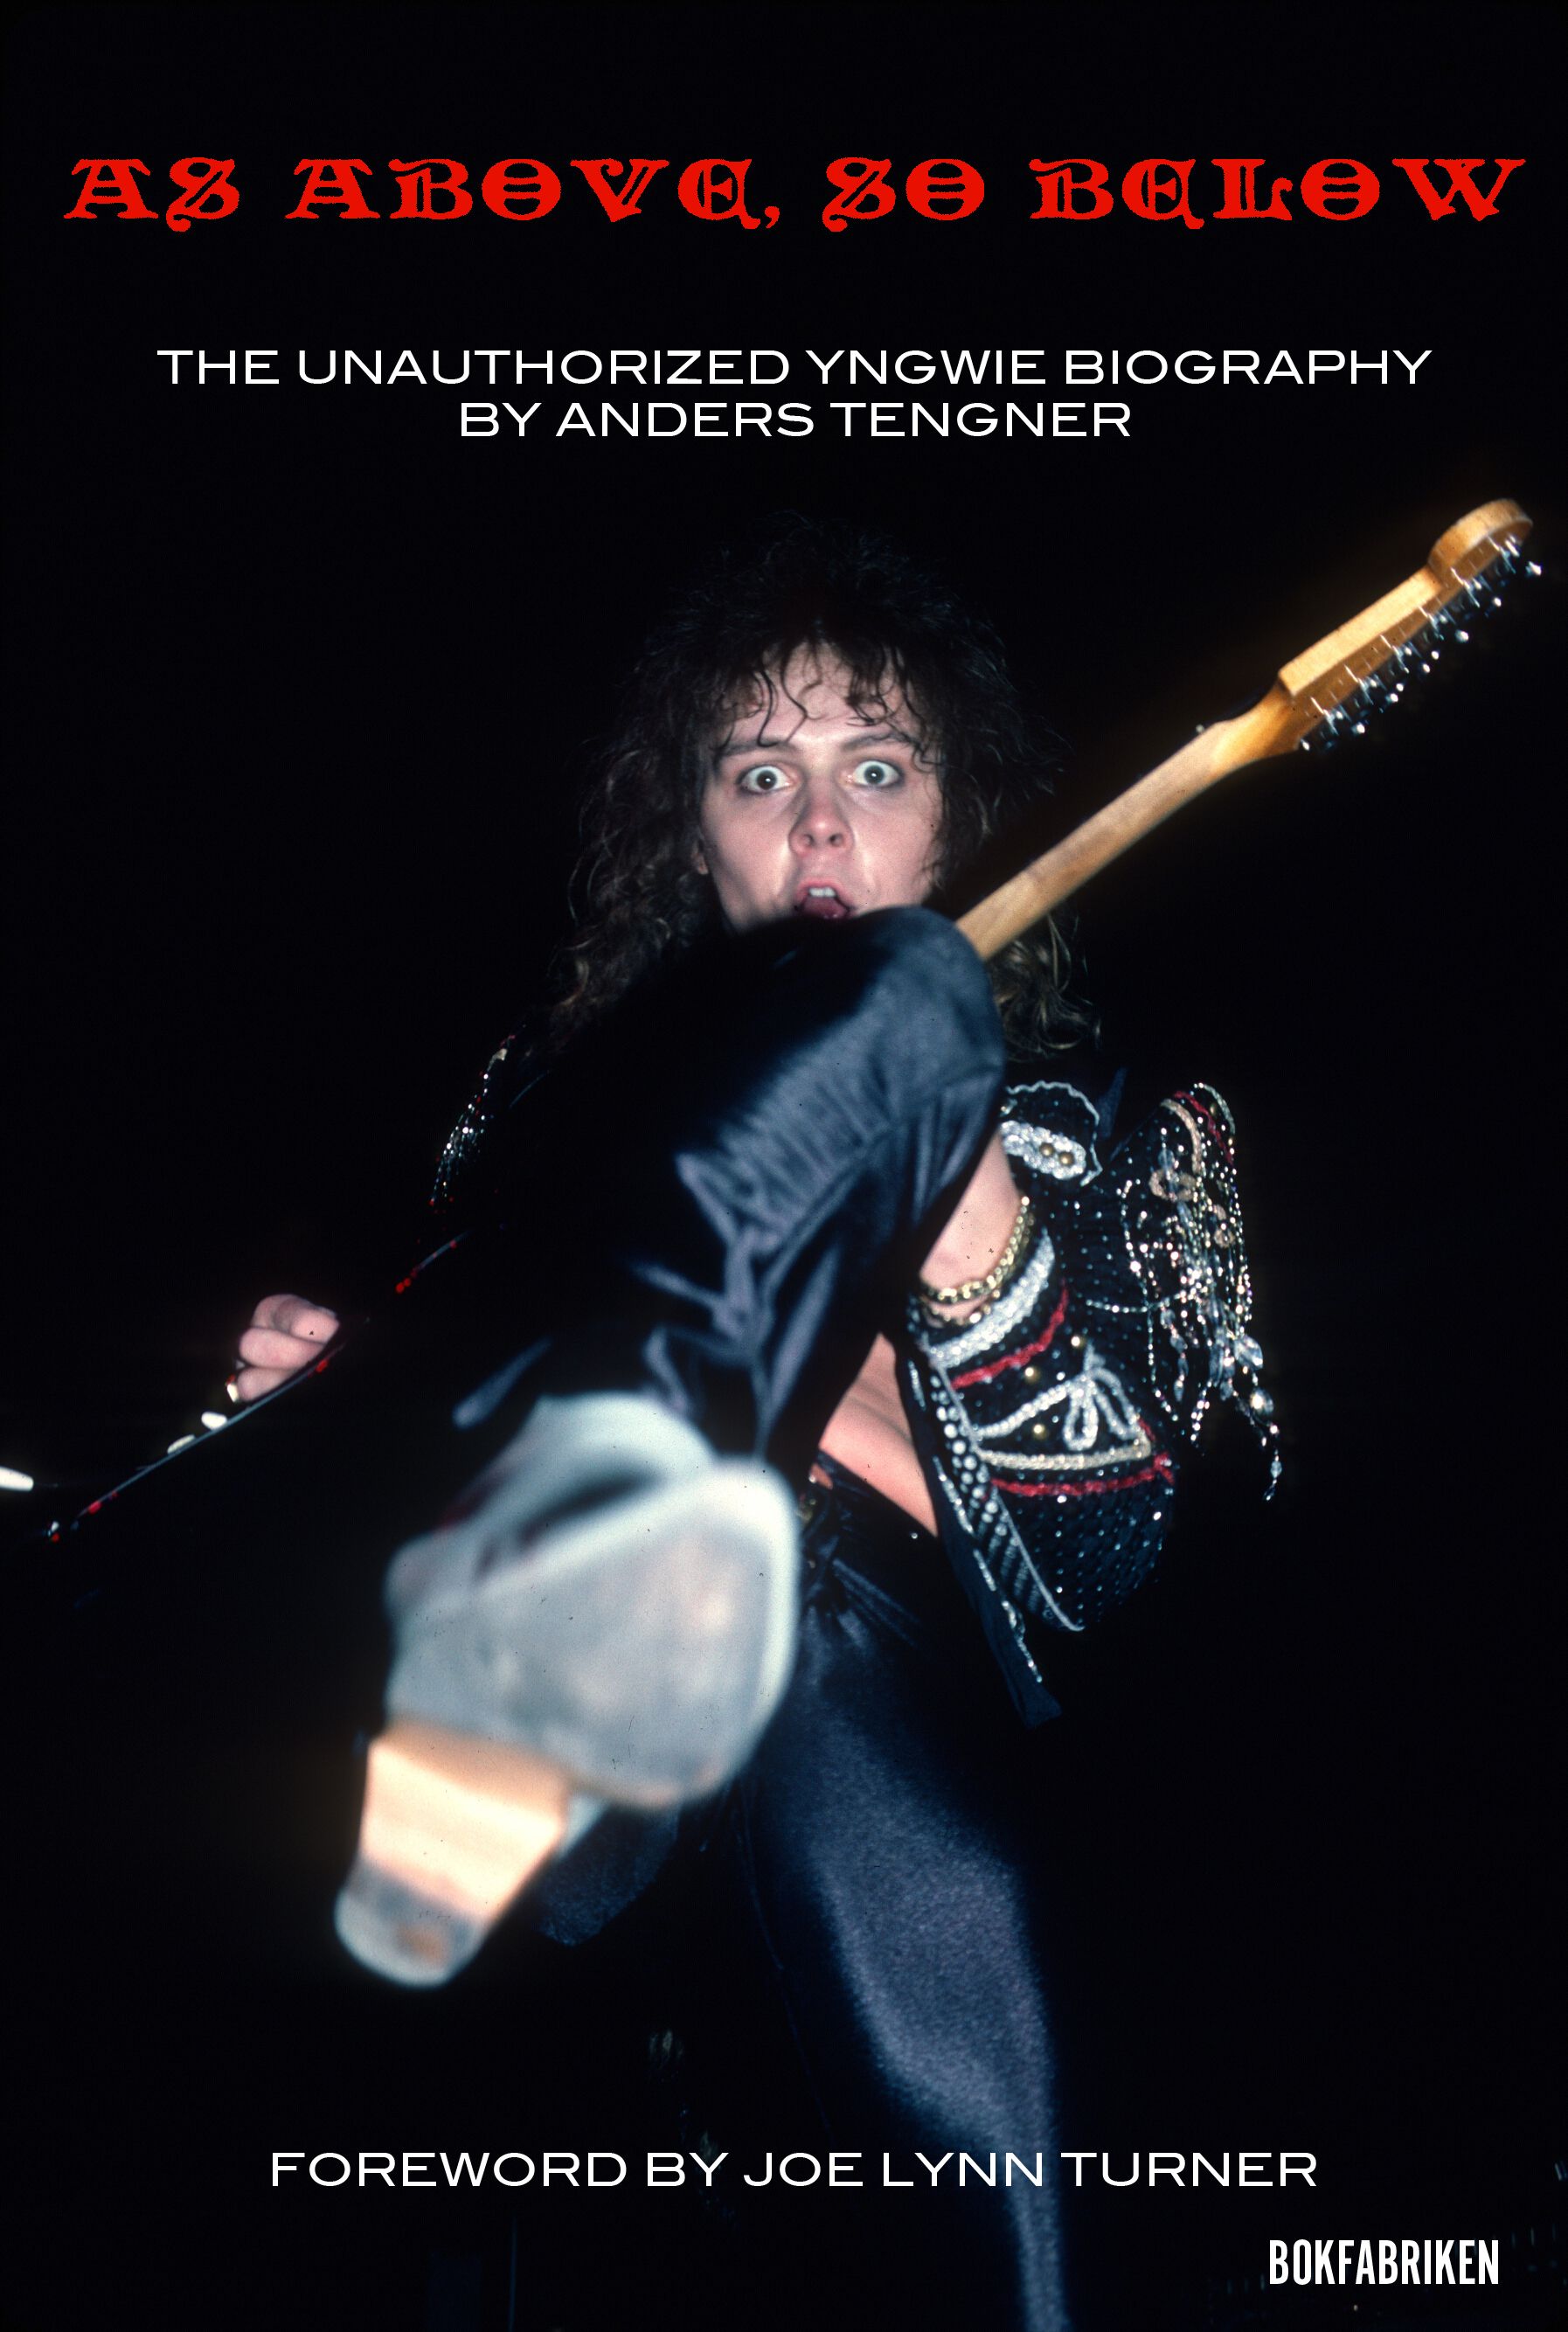 As Above, So Below : The Unauthorized Yngwie Malmsteen Biography, e-bog af Anders Tengner